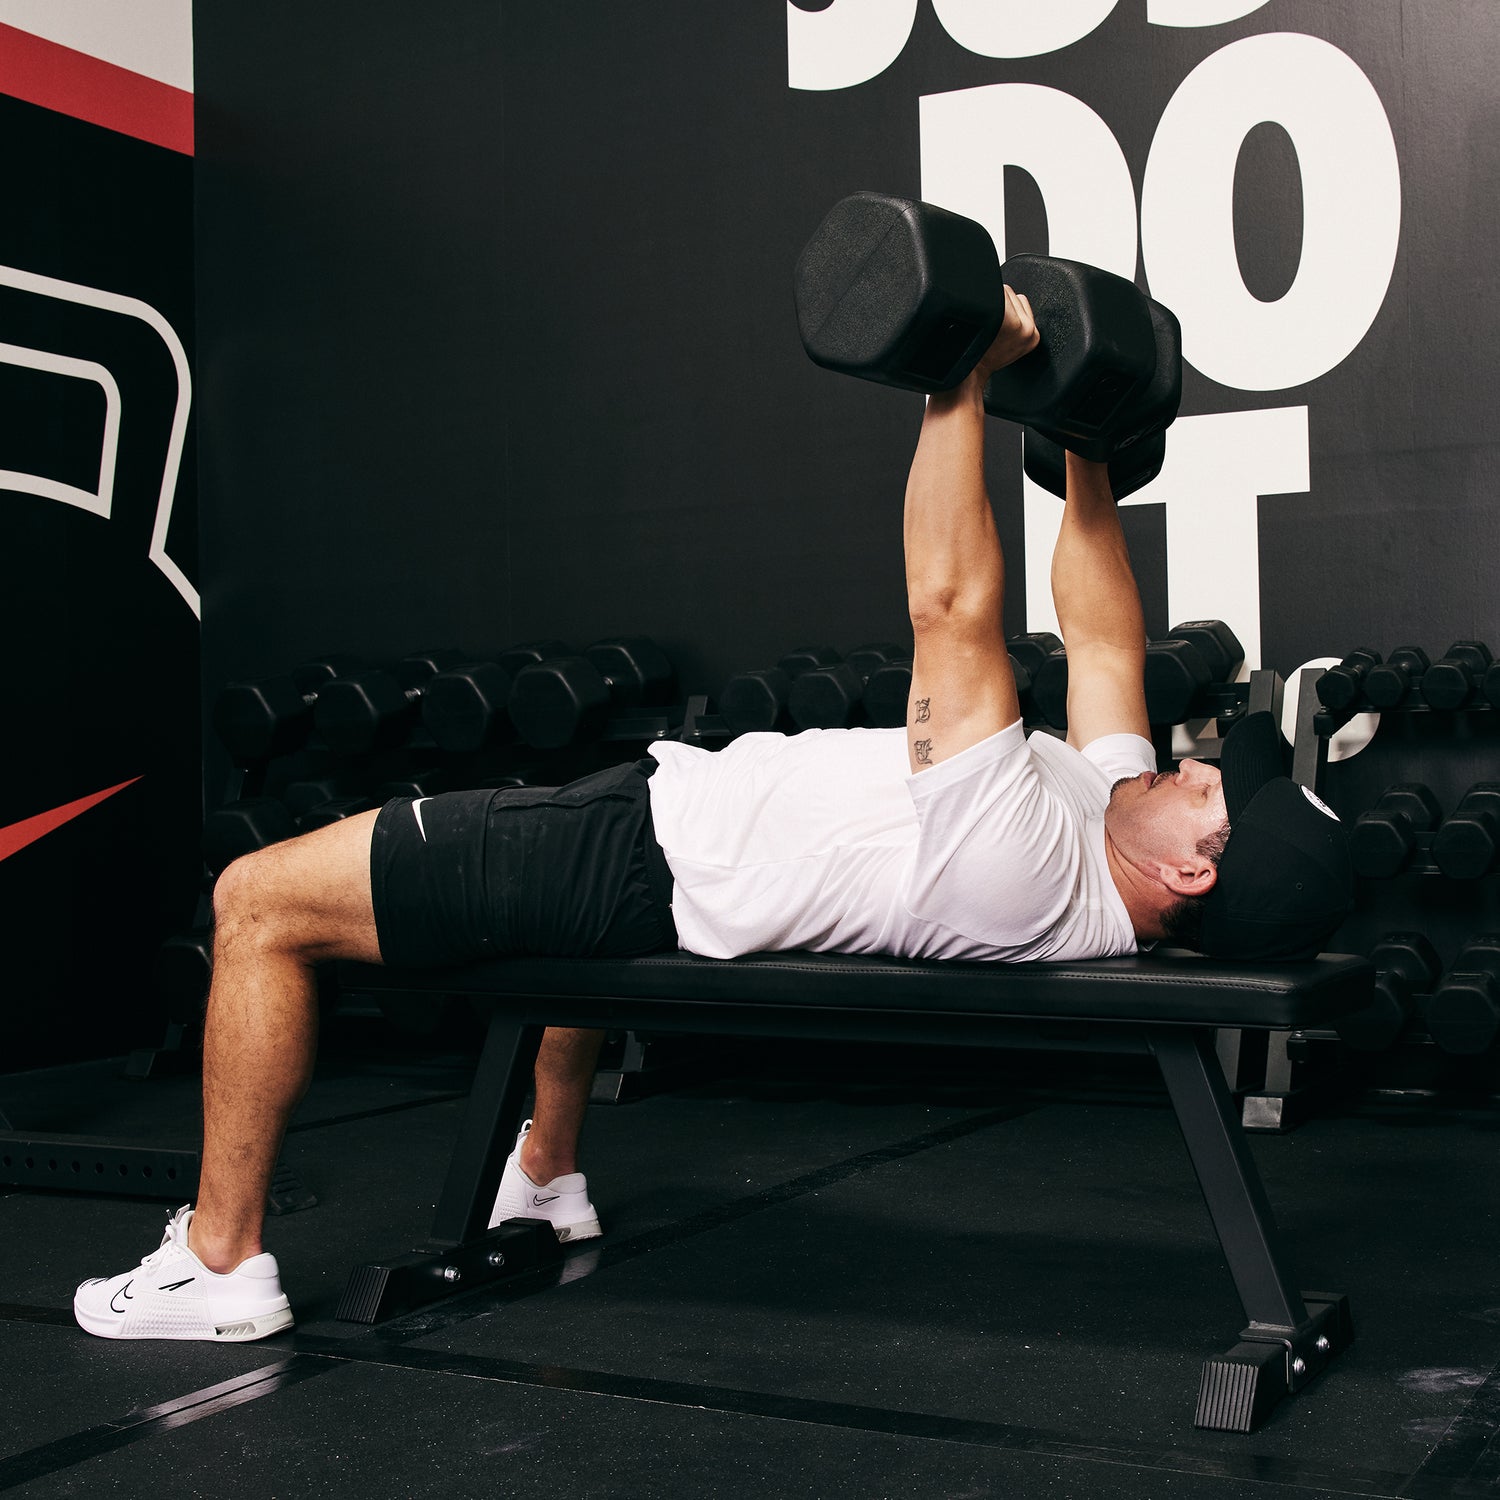 Male Athlete lying on the Nike Flat Weight Bench and bench pressing Nike Dumbbells